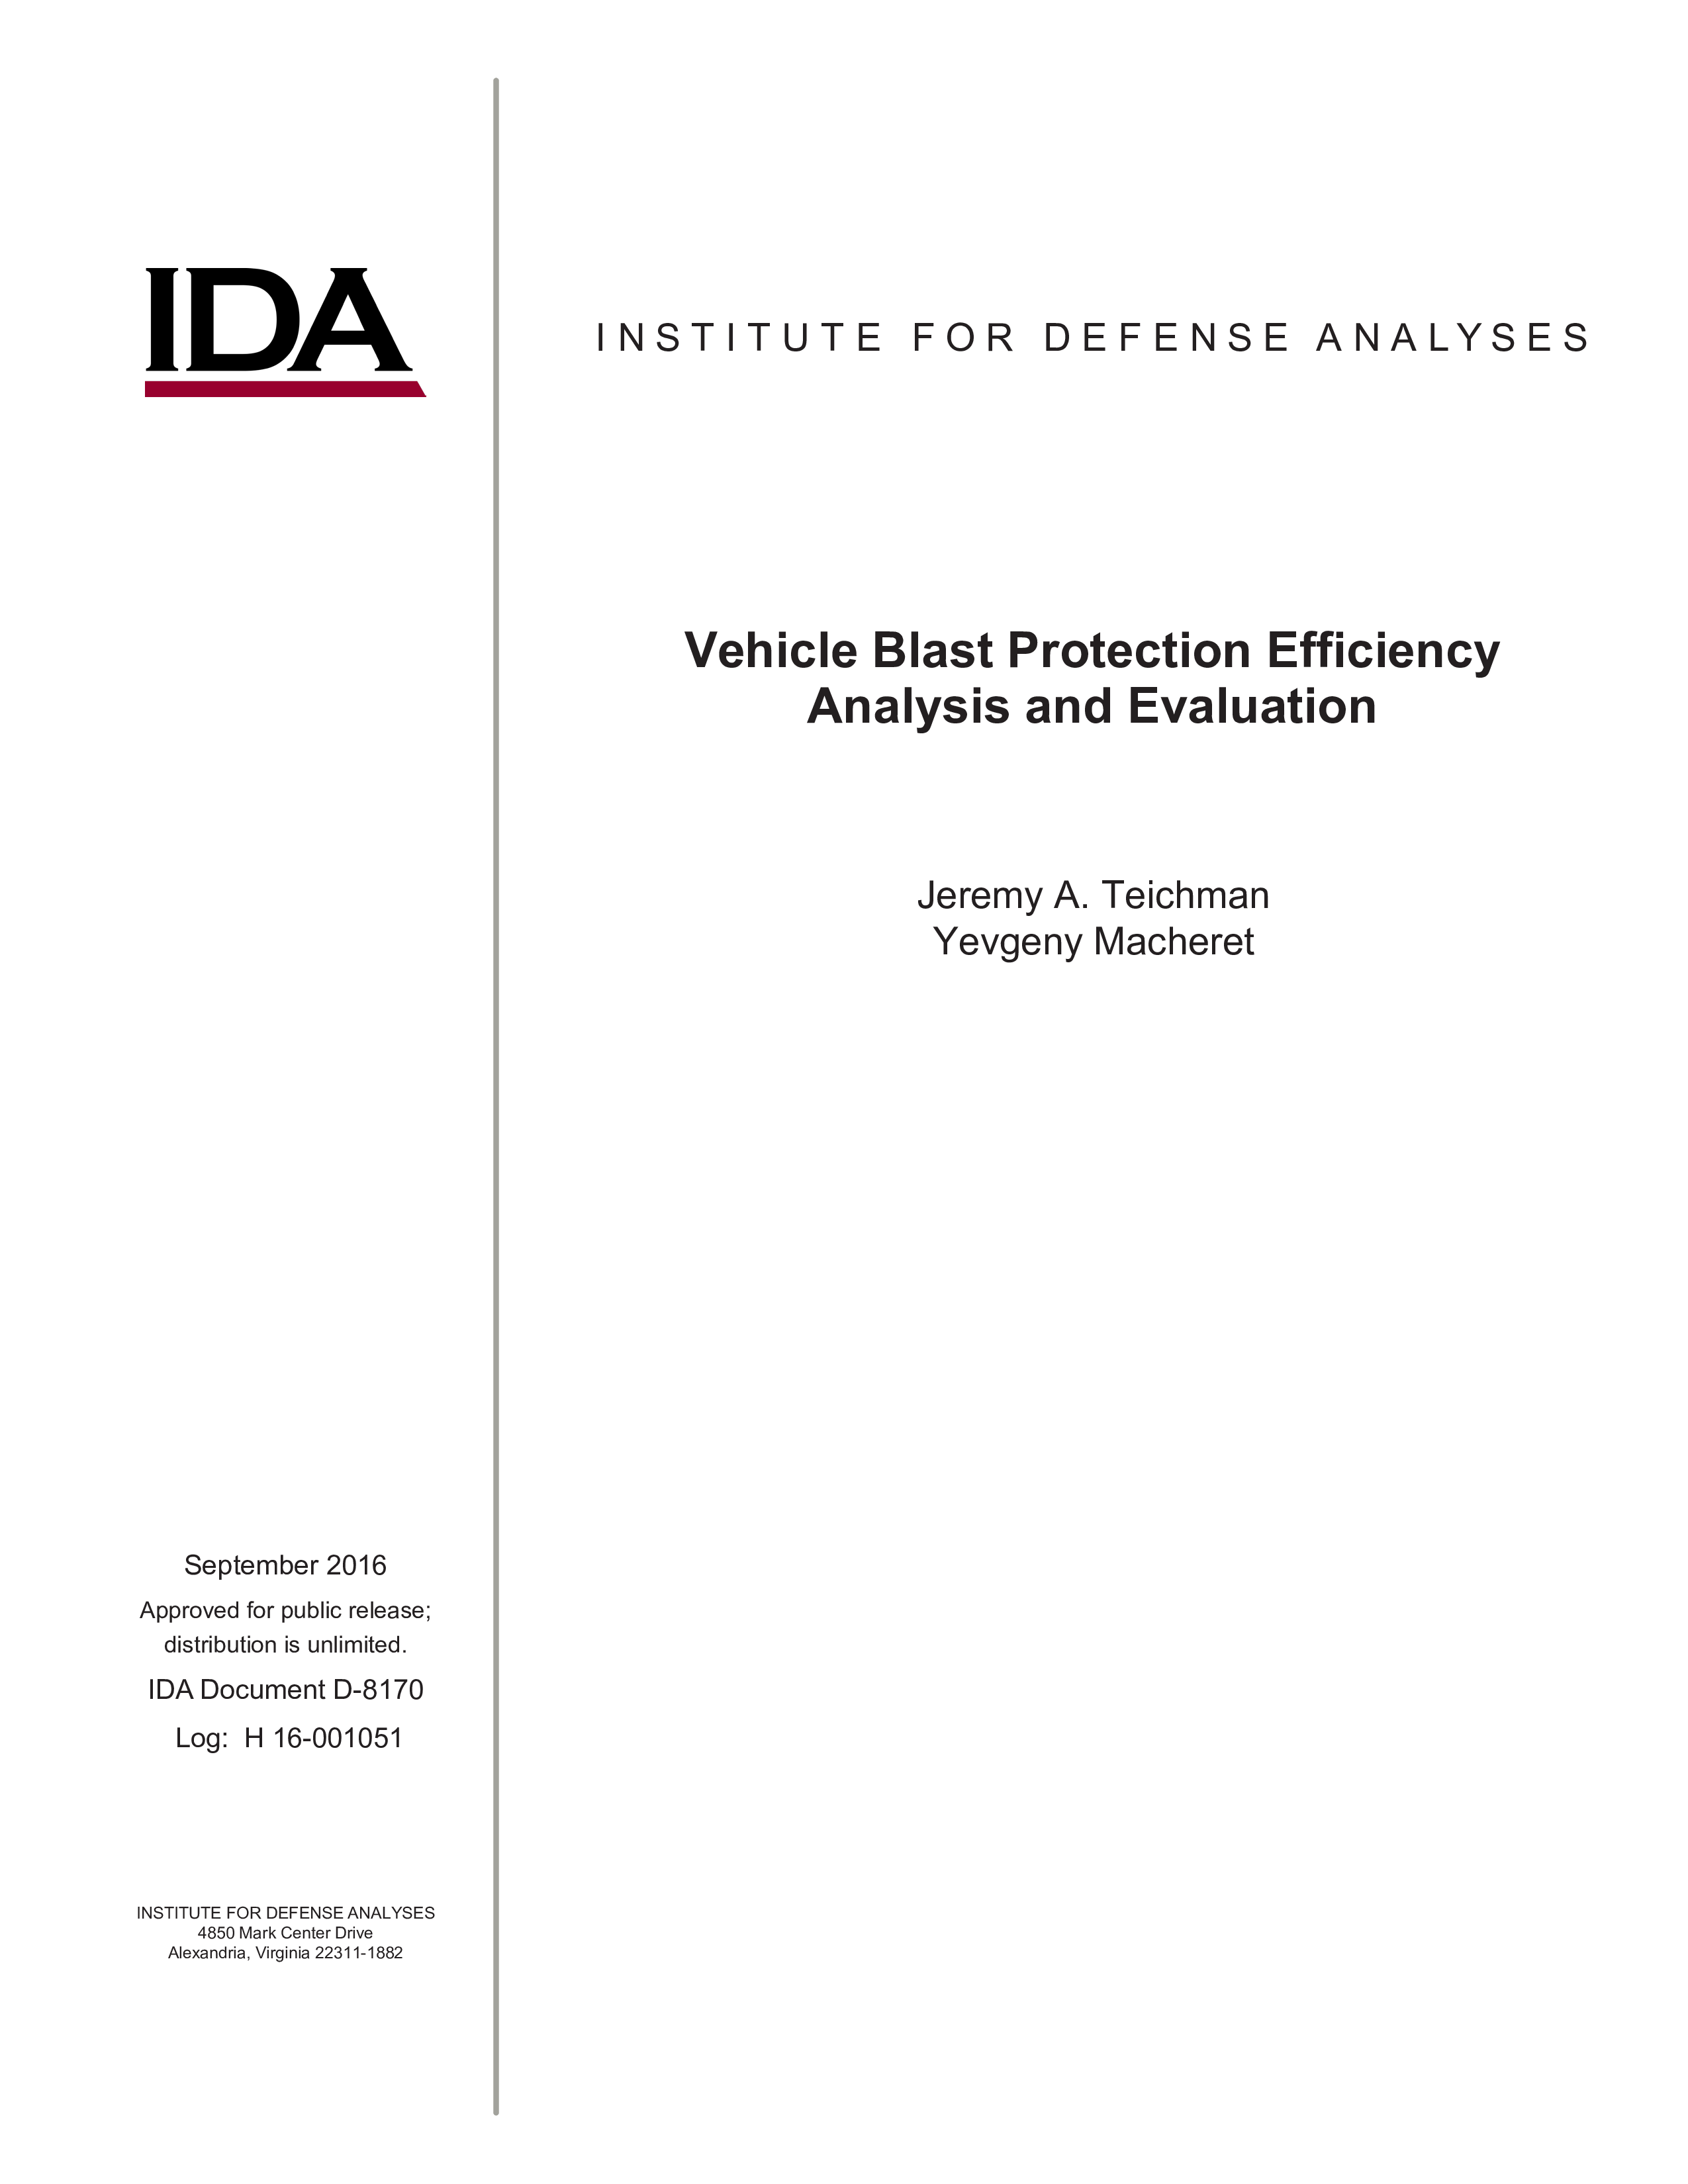 Vehicle Blast Protection Efficiency Analysis and Evaluation